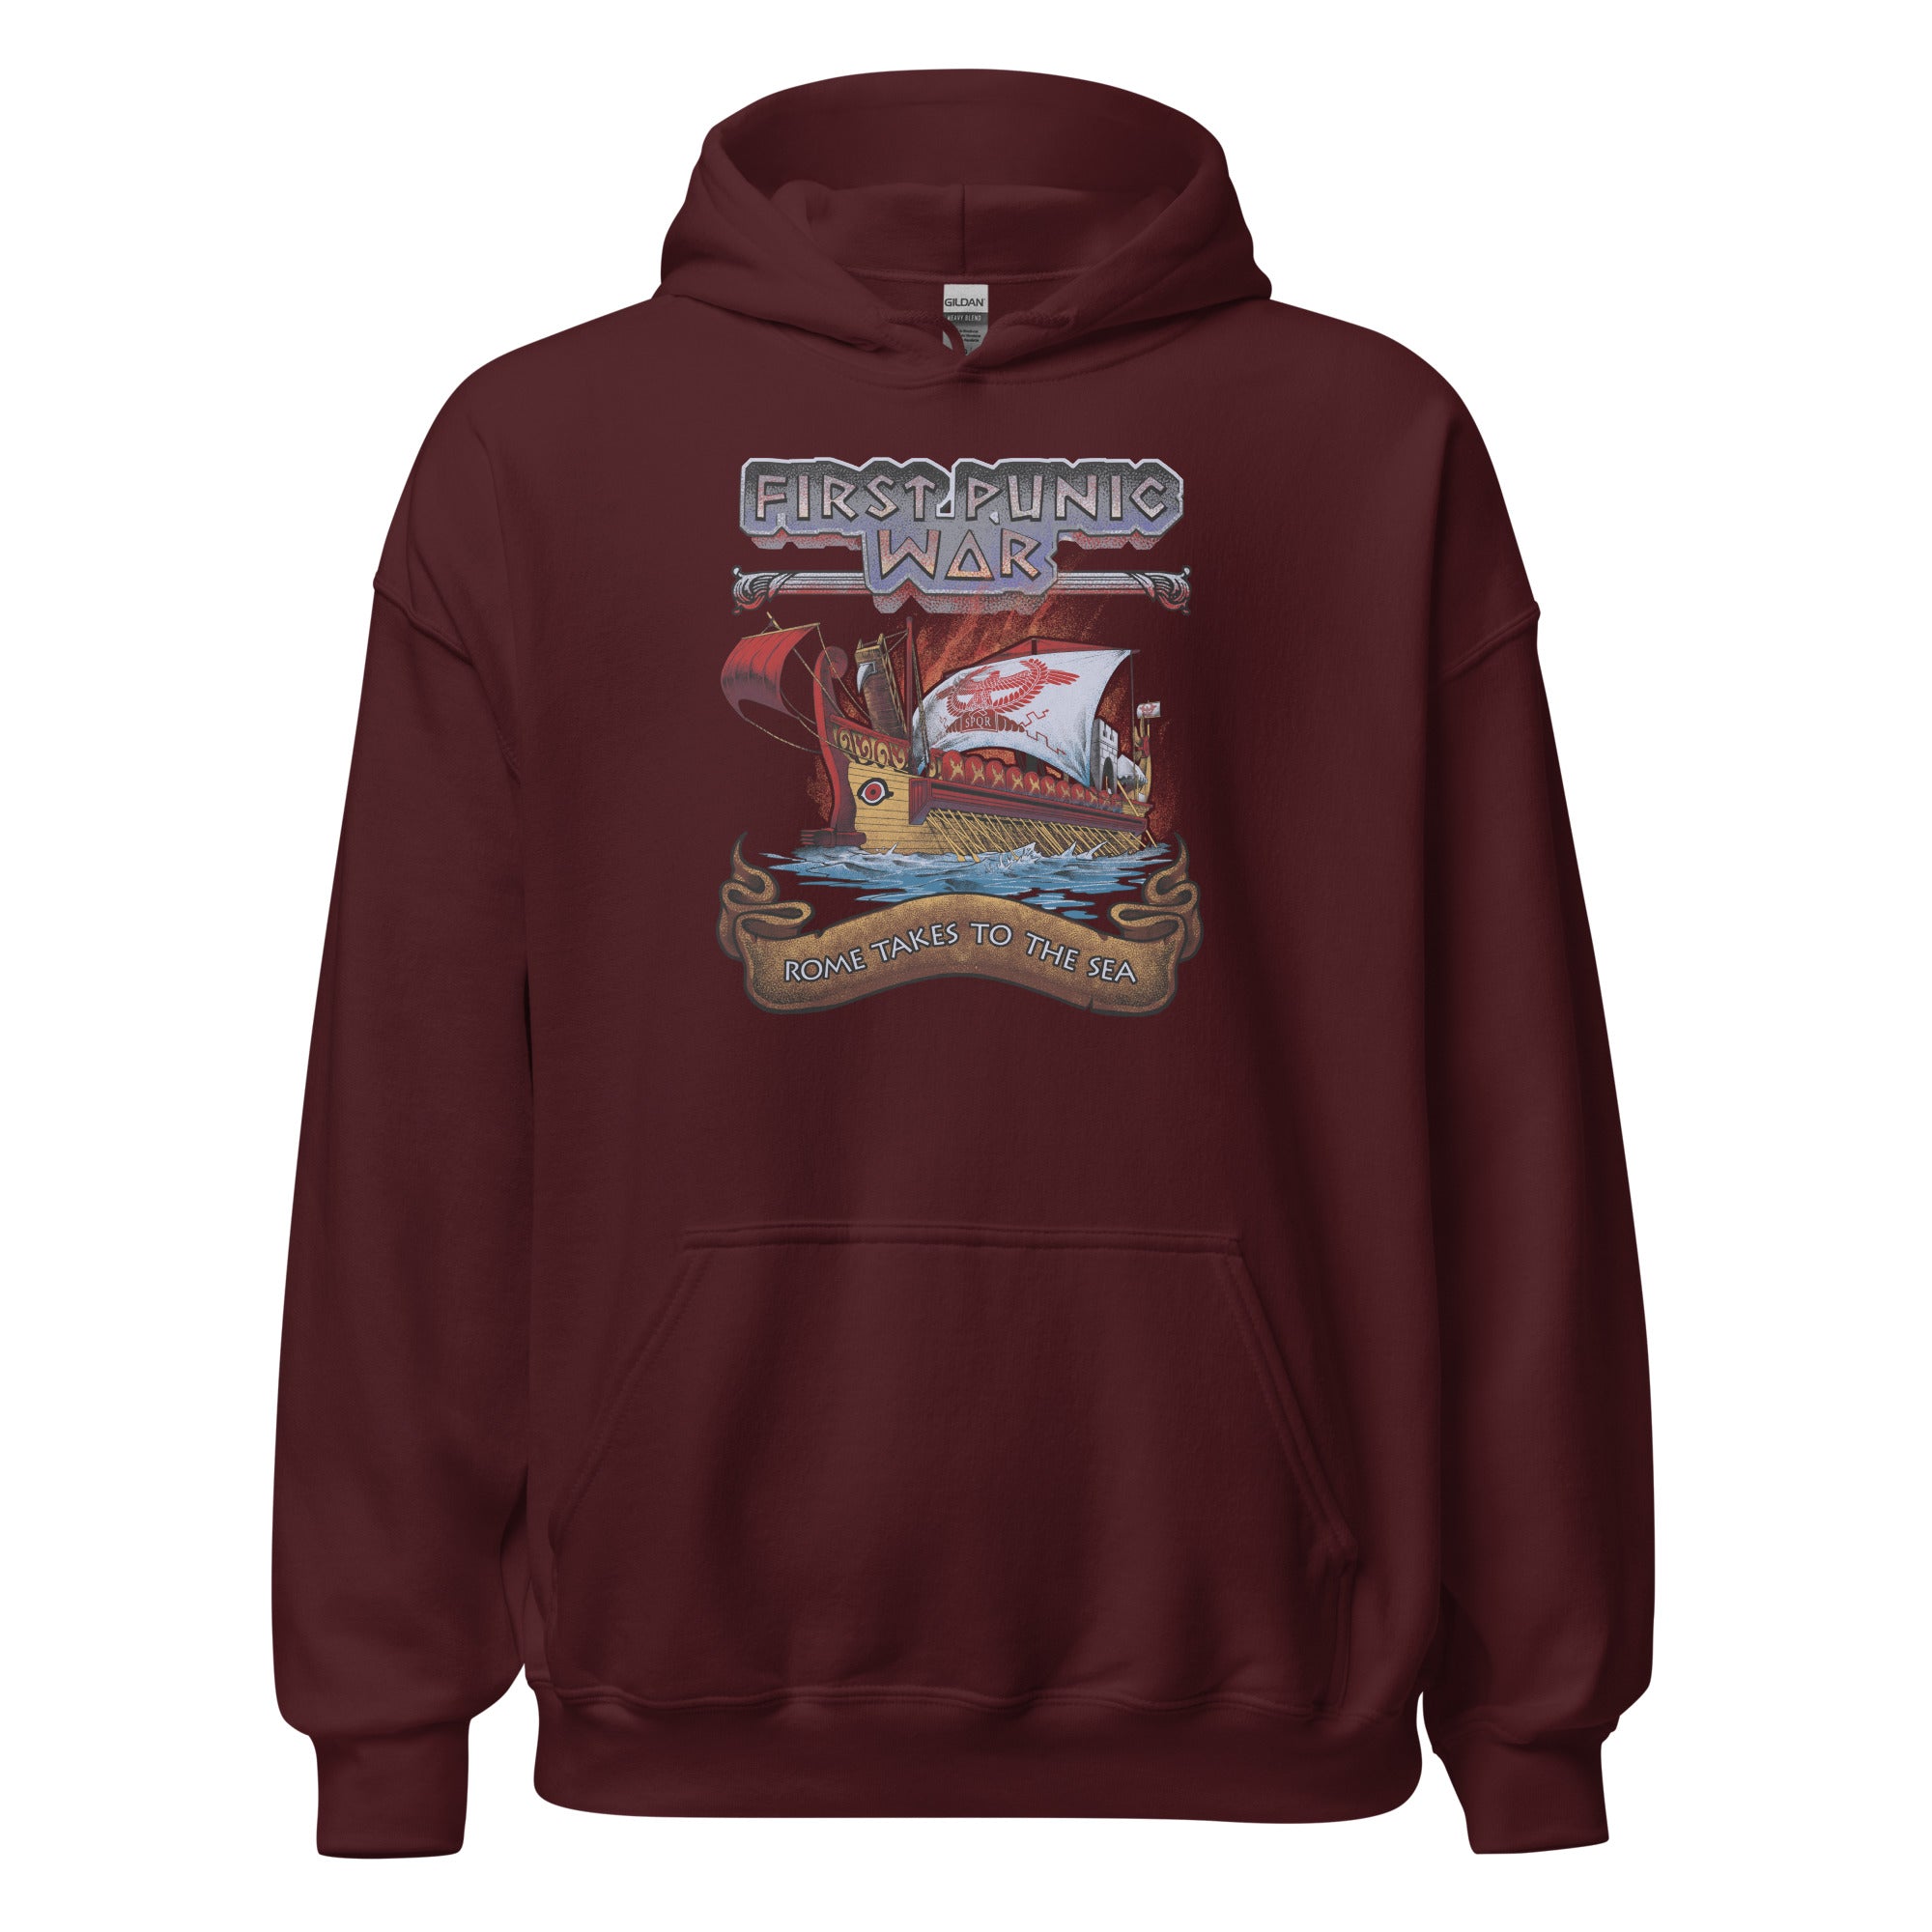 First Punic War - Rome Takes To The Sea - Naval History Unisex Hoodie